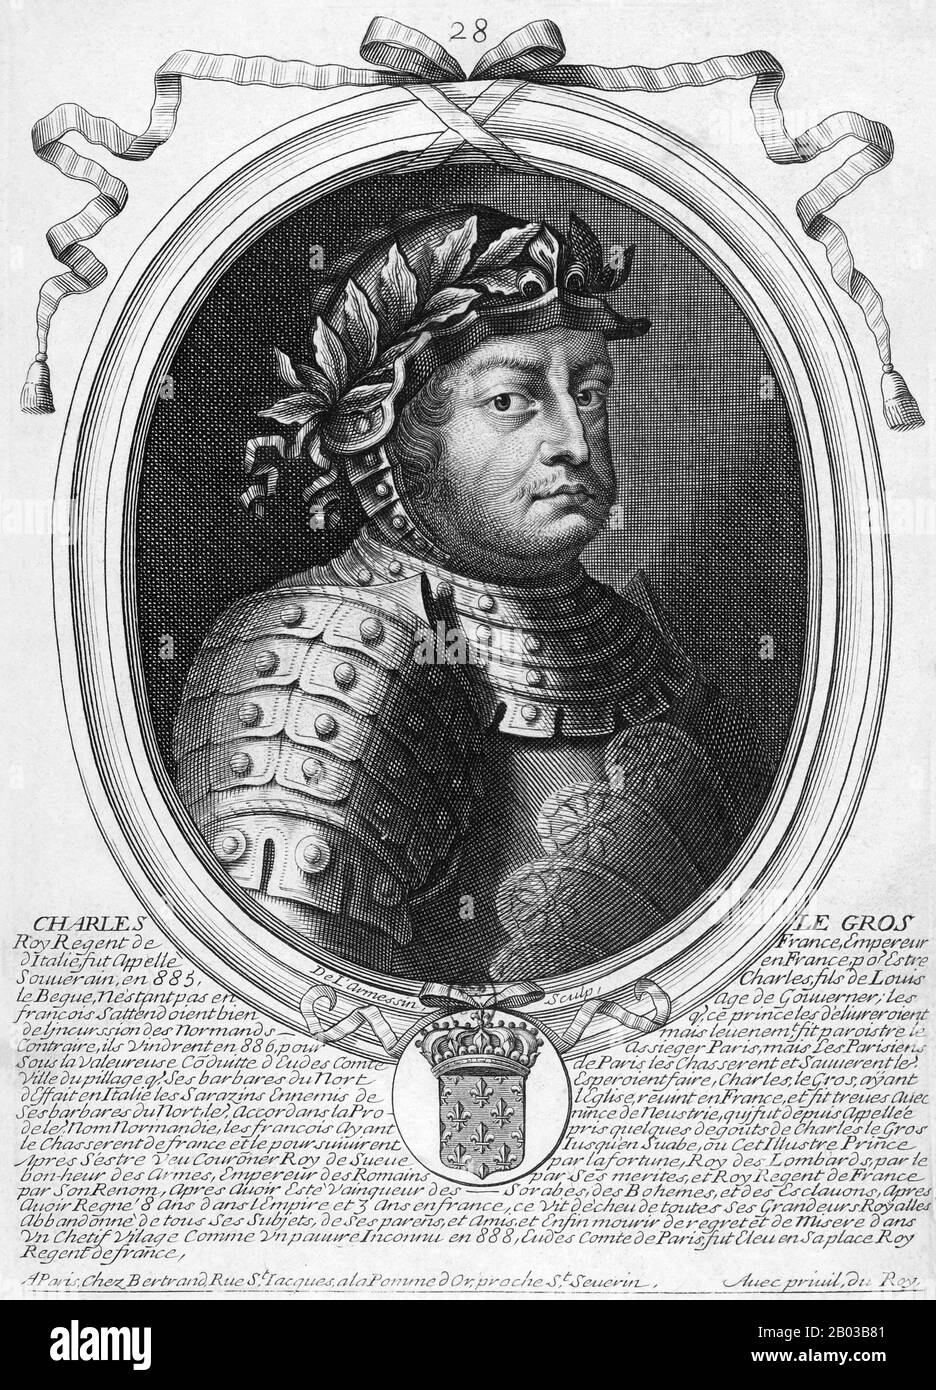 Charles III (839-888), more commonly known as Charles the Fat, was the youngest son of Louis the German, King of East Francia, and great-grandson of Emperor Charlemagne. He was crowned as Holy Roman emperor in 881, and succeeded his brother Louis the Younger as king of Saxony and Bavaria a year later, reuniting the Kingdom of East Francia. Stock Photo